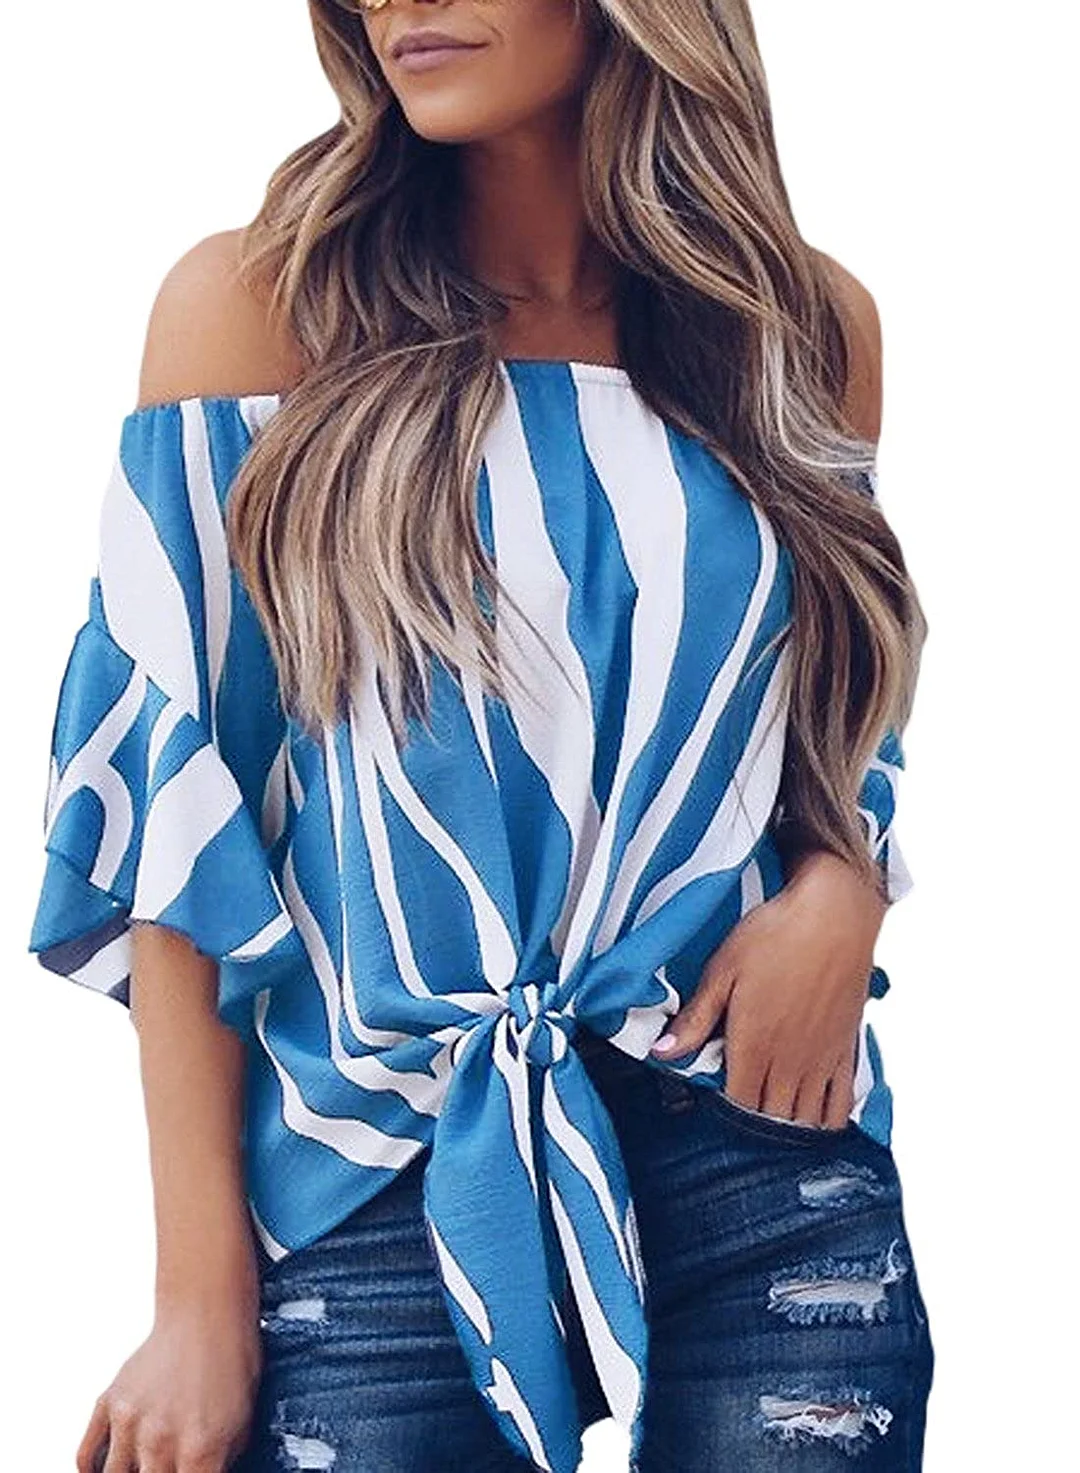 Women's Tops Blouse Striped 3/4 Bell Sleeve Off The Shoulder Front Tie Knot T Shirt